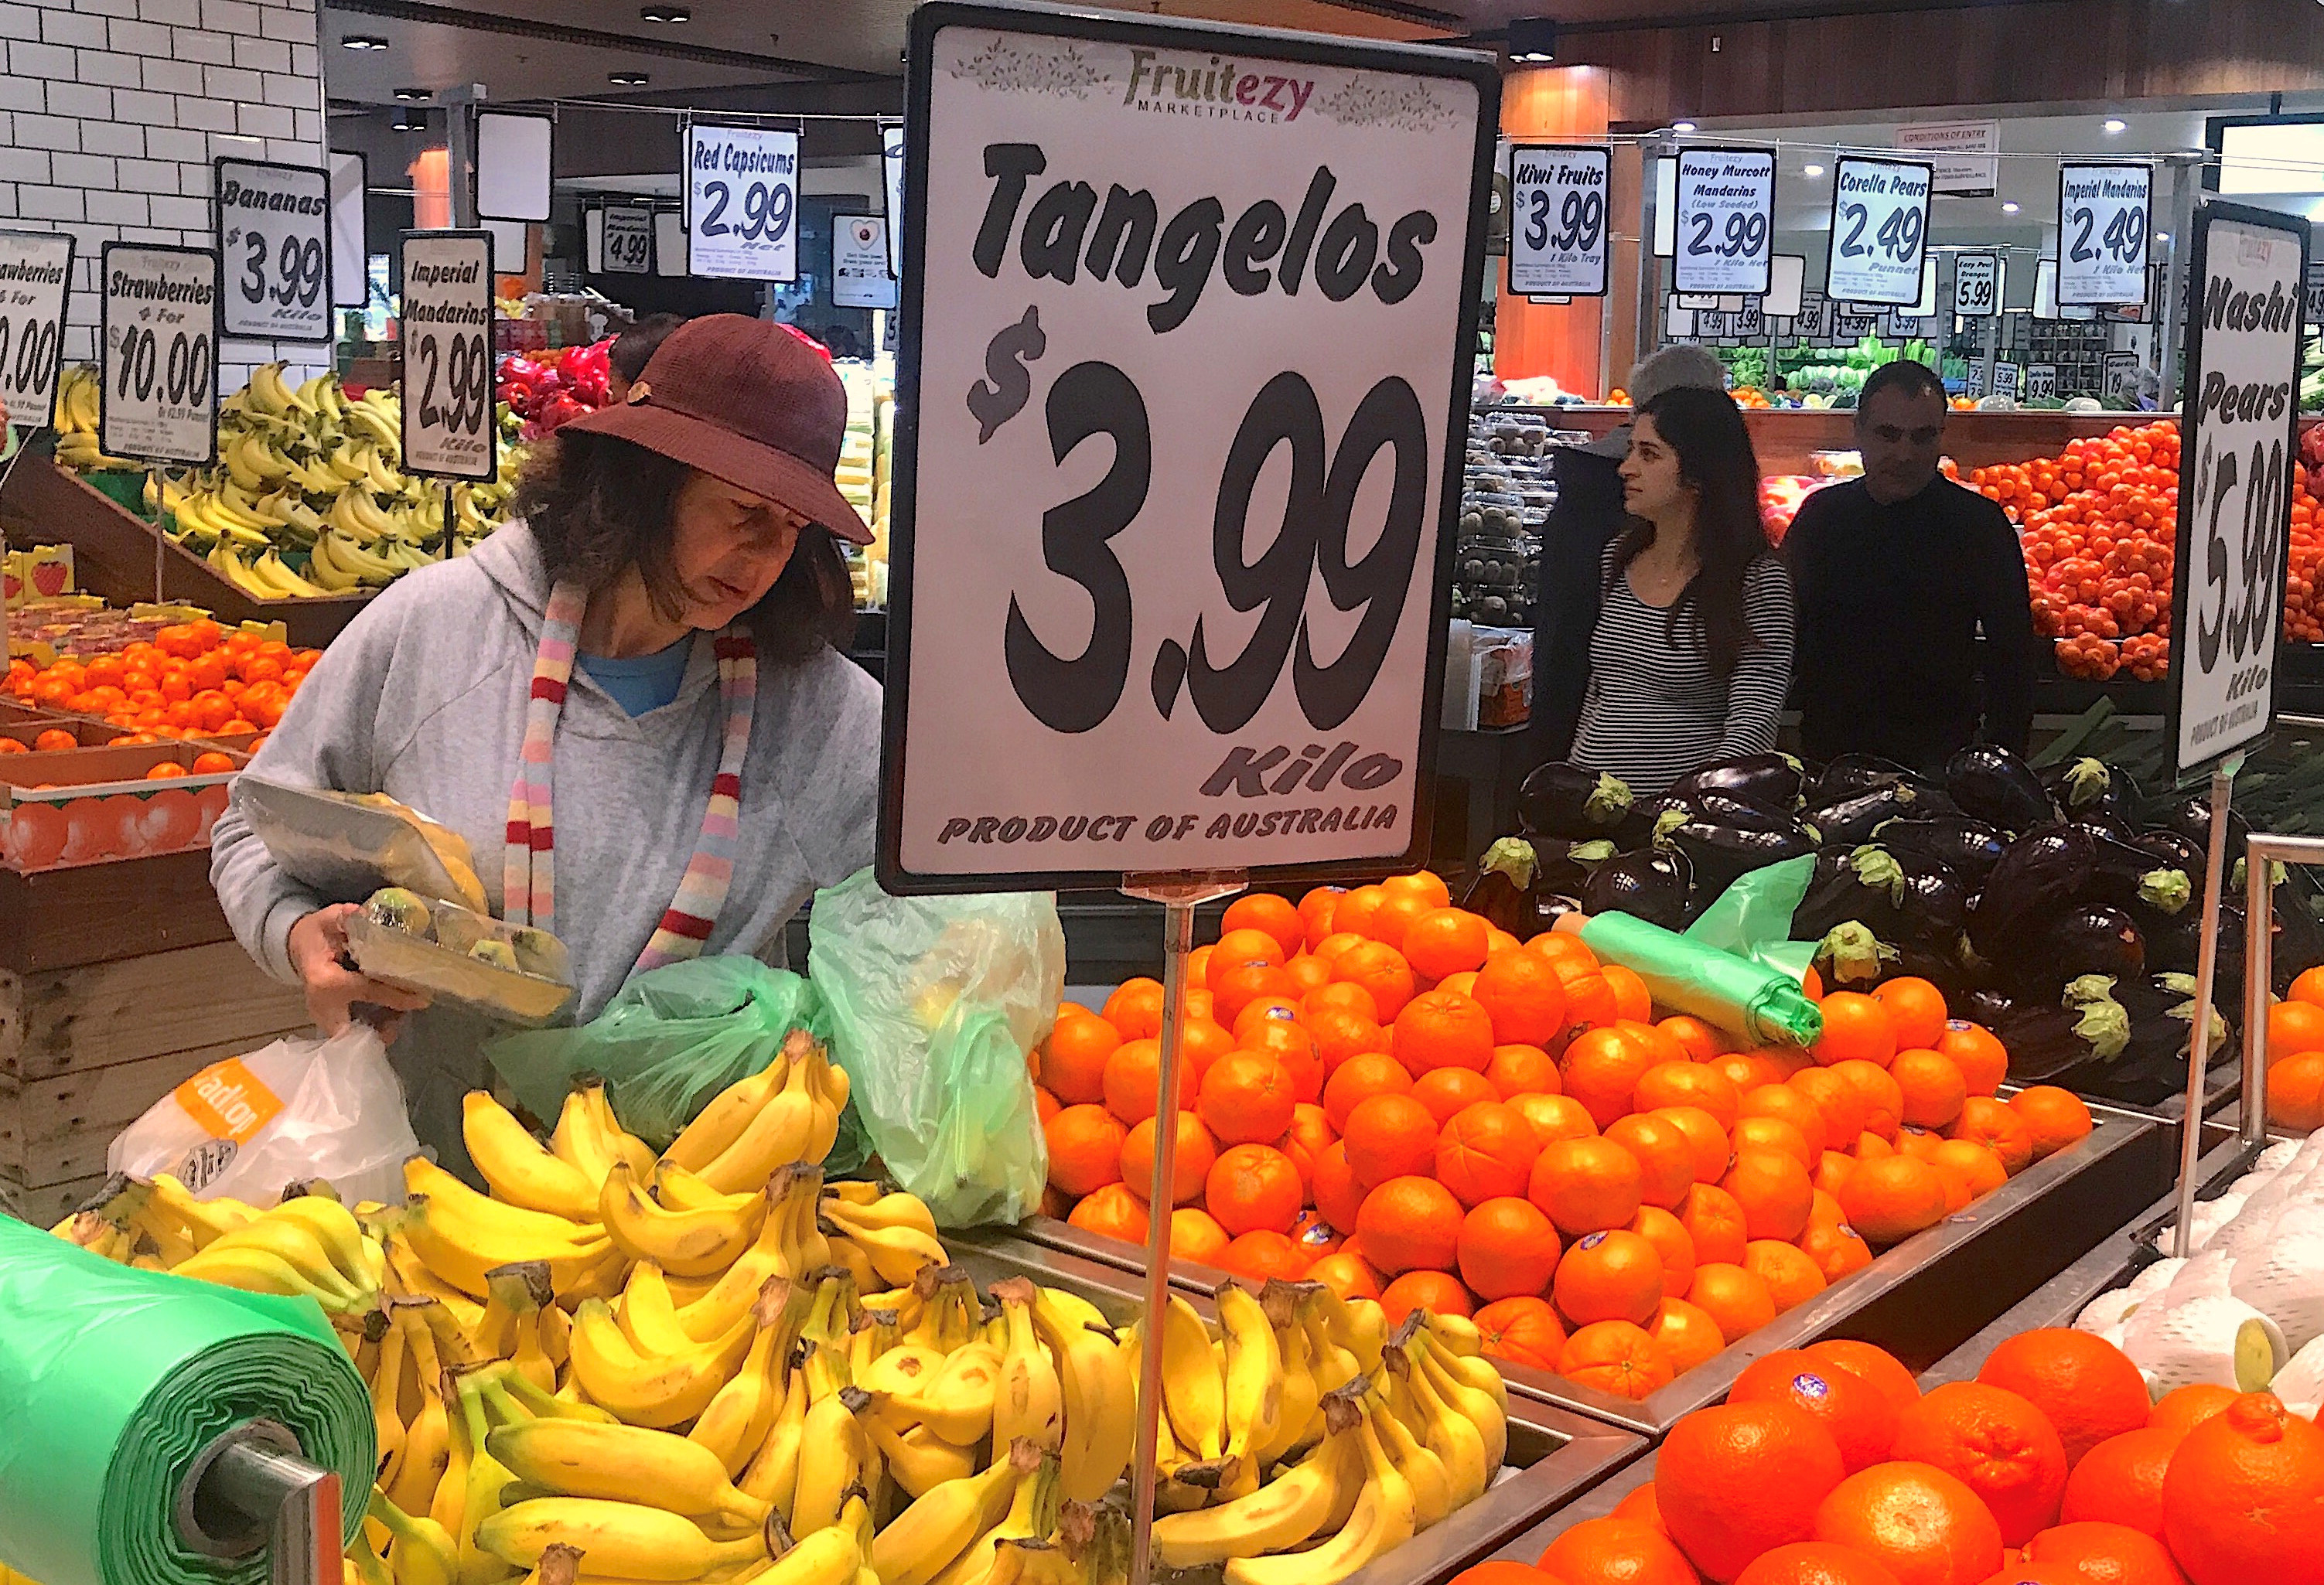 Shoppers look at a range of fruit and vegetables on sale at a store in a shopping mall in Sydney, Australia